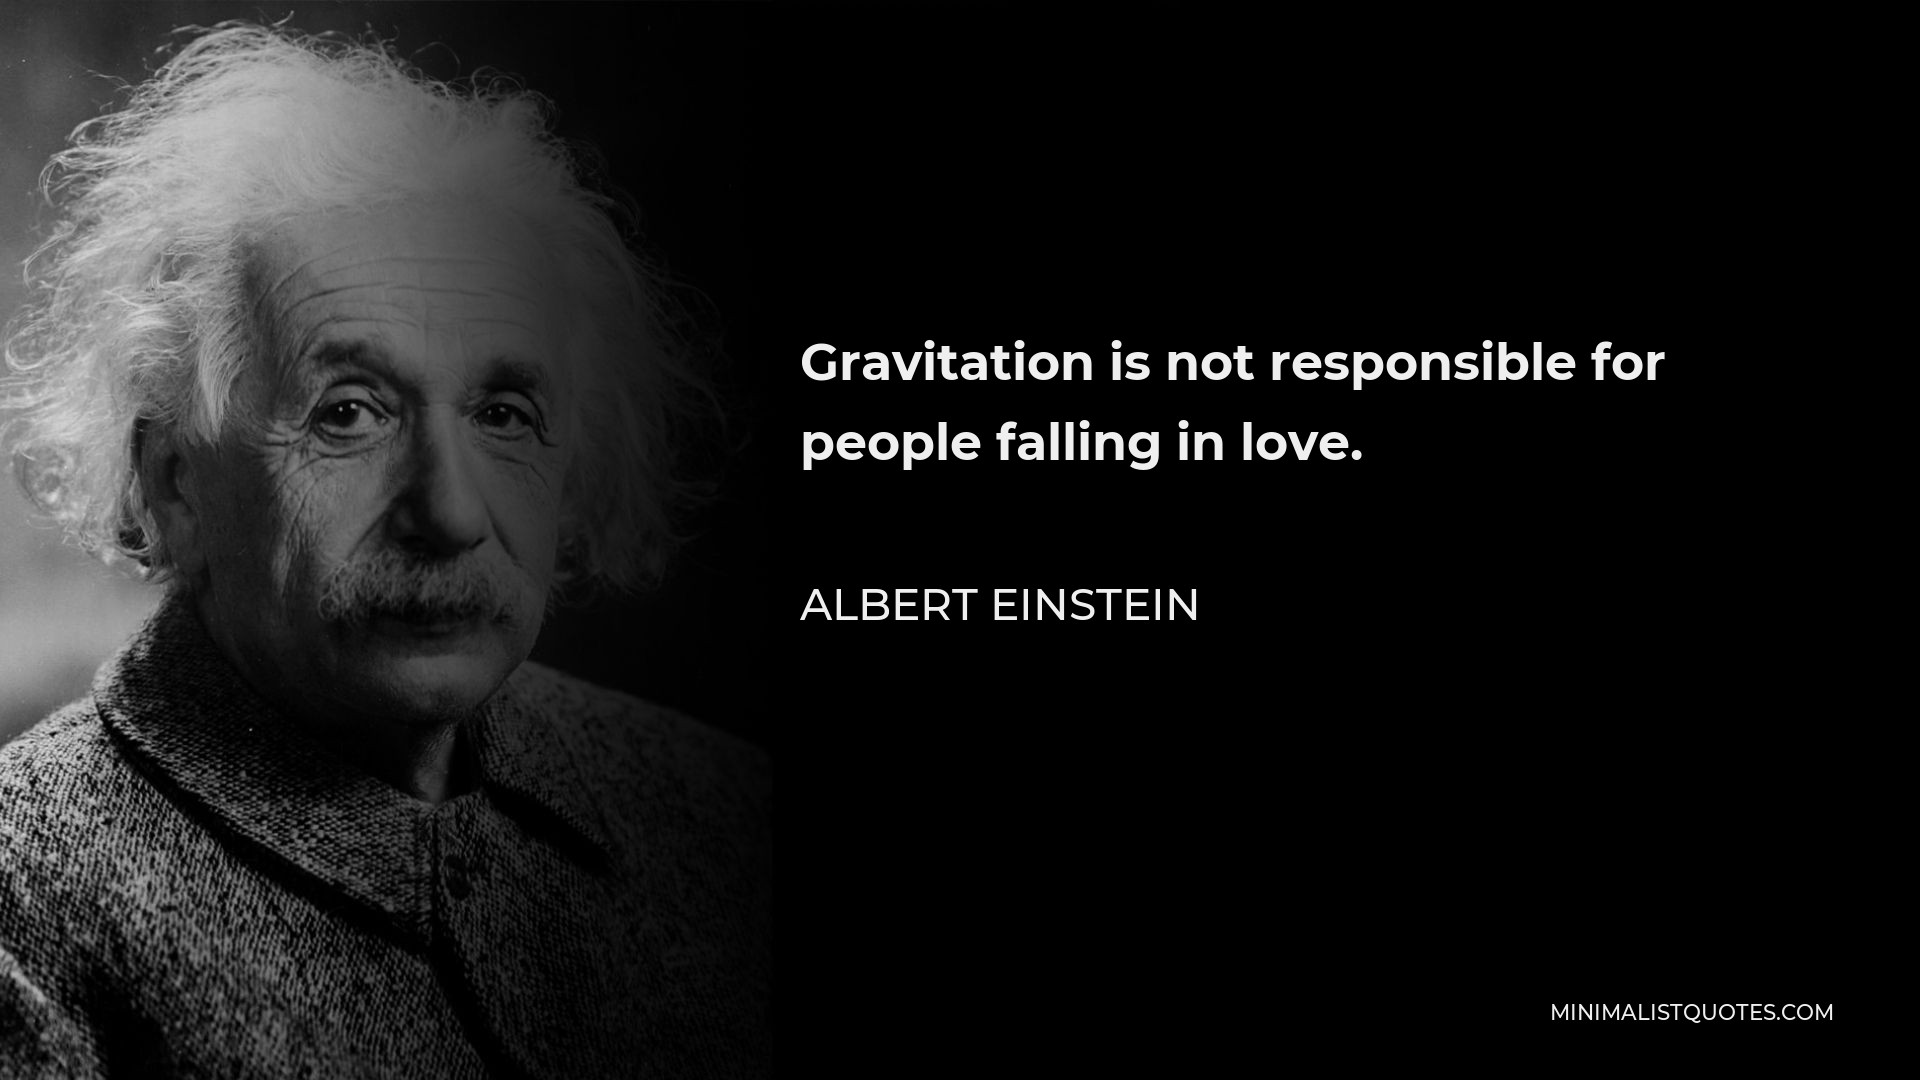 Albert Einstein Quote - Gravitation is not responsible for people falling in love.